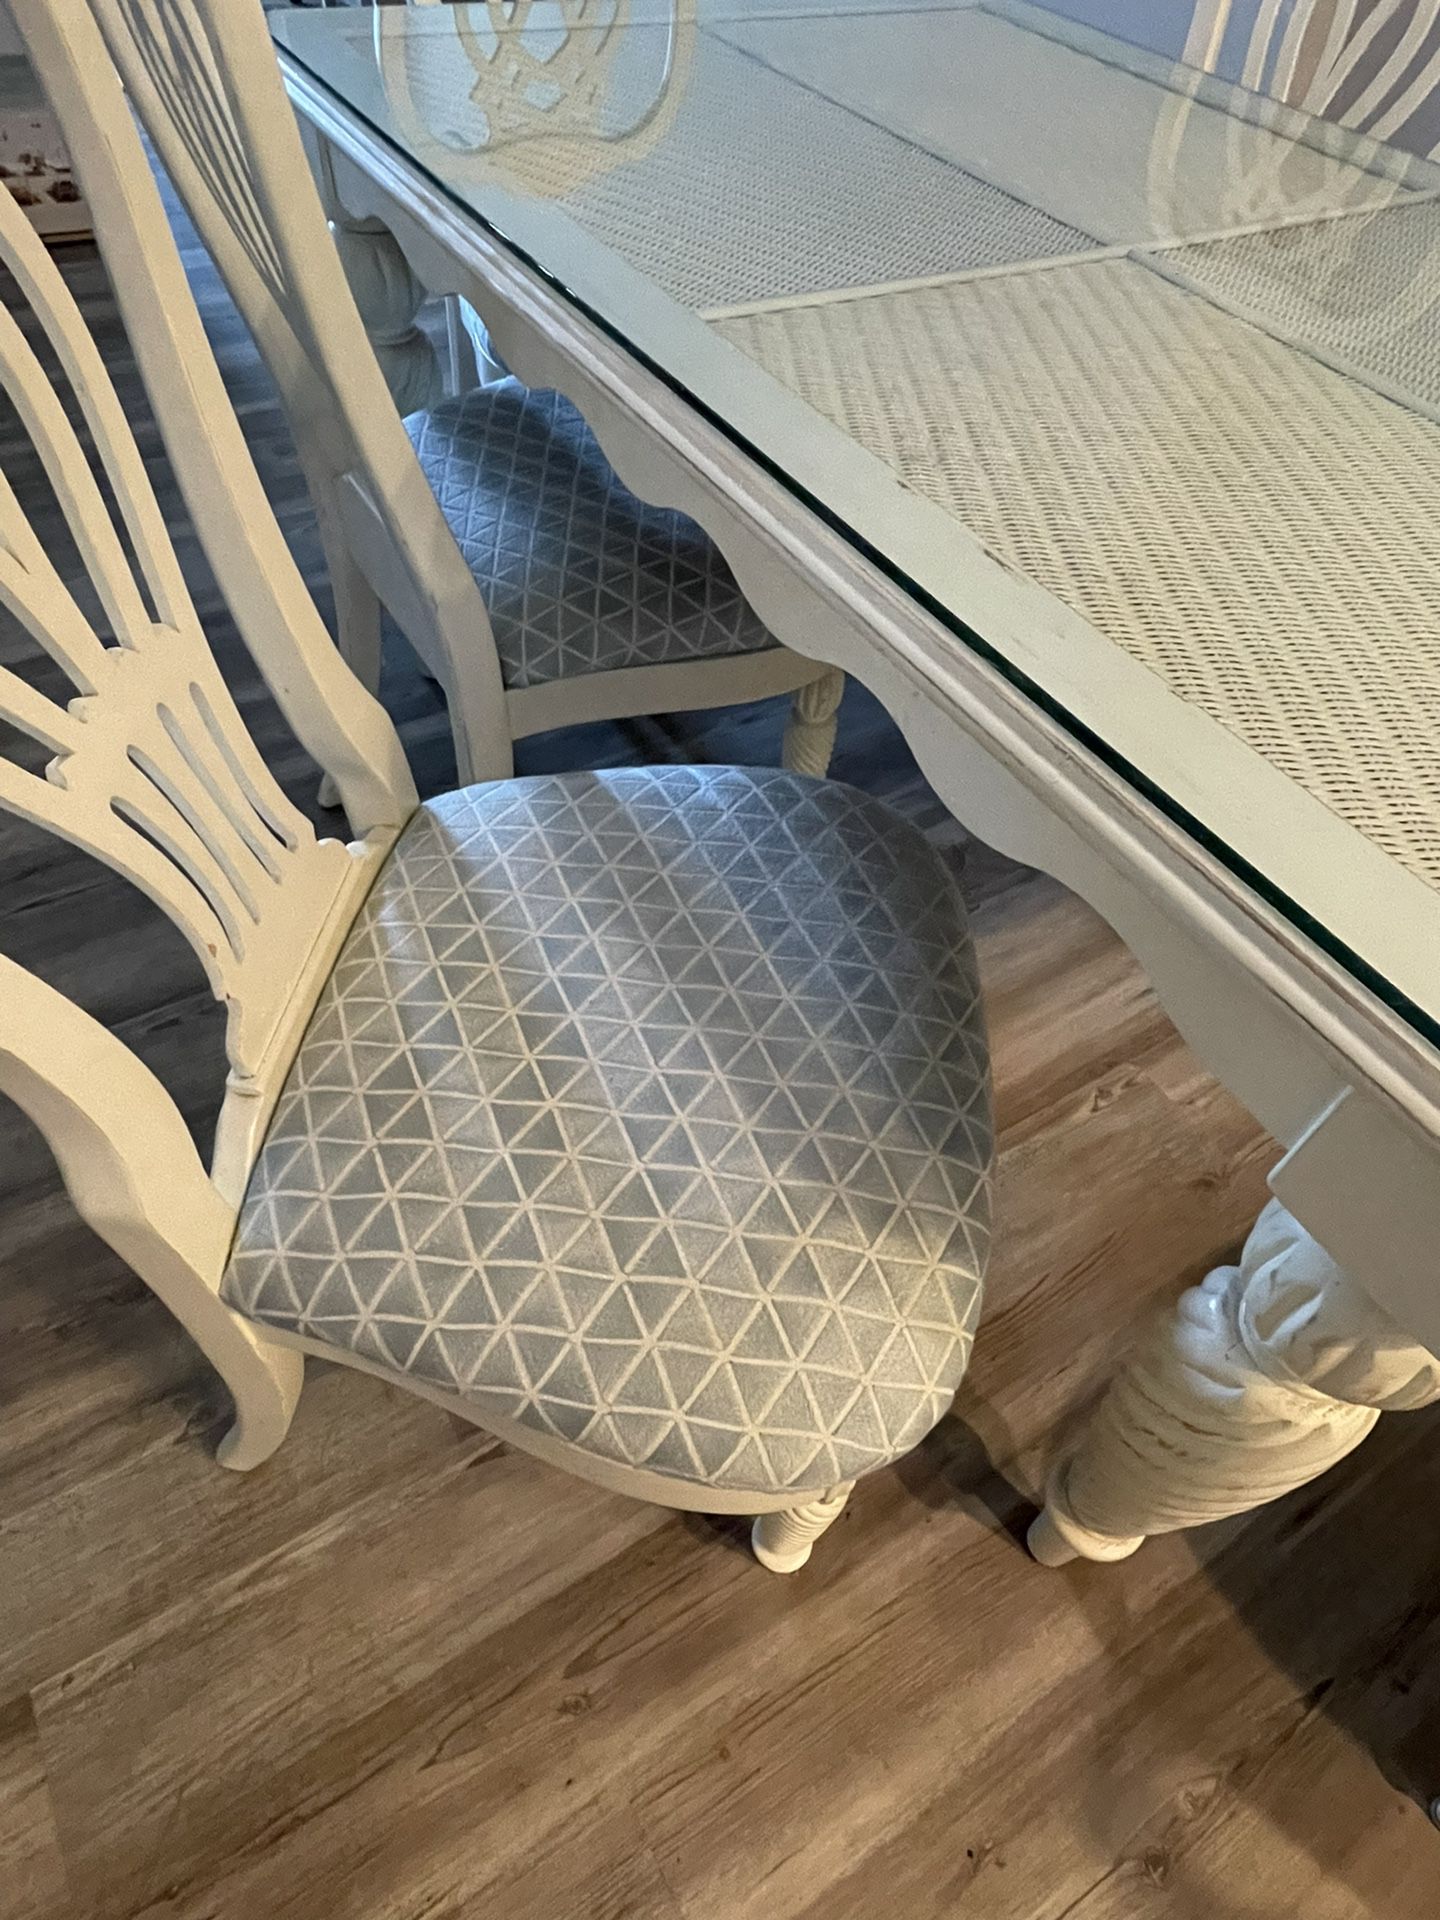 Kitchen Dining Table (Glass Top) W/ 6 Chairs 